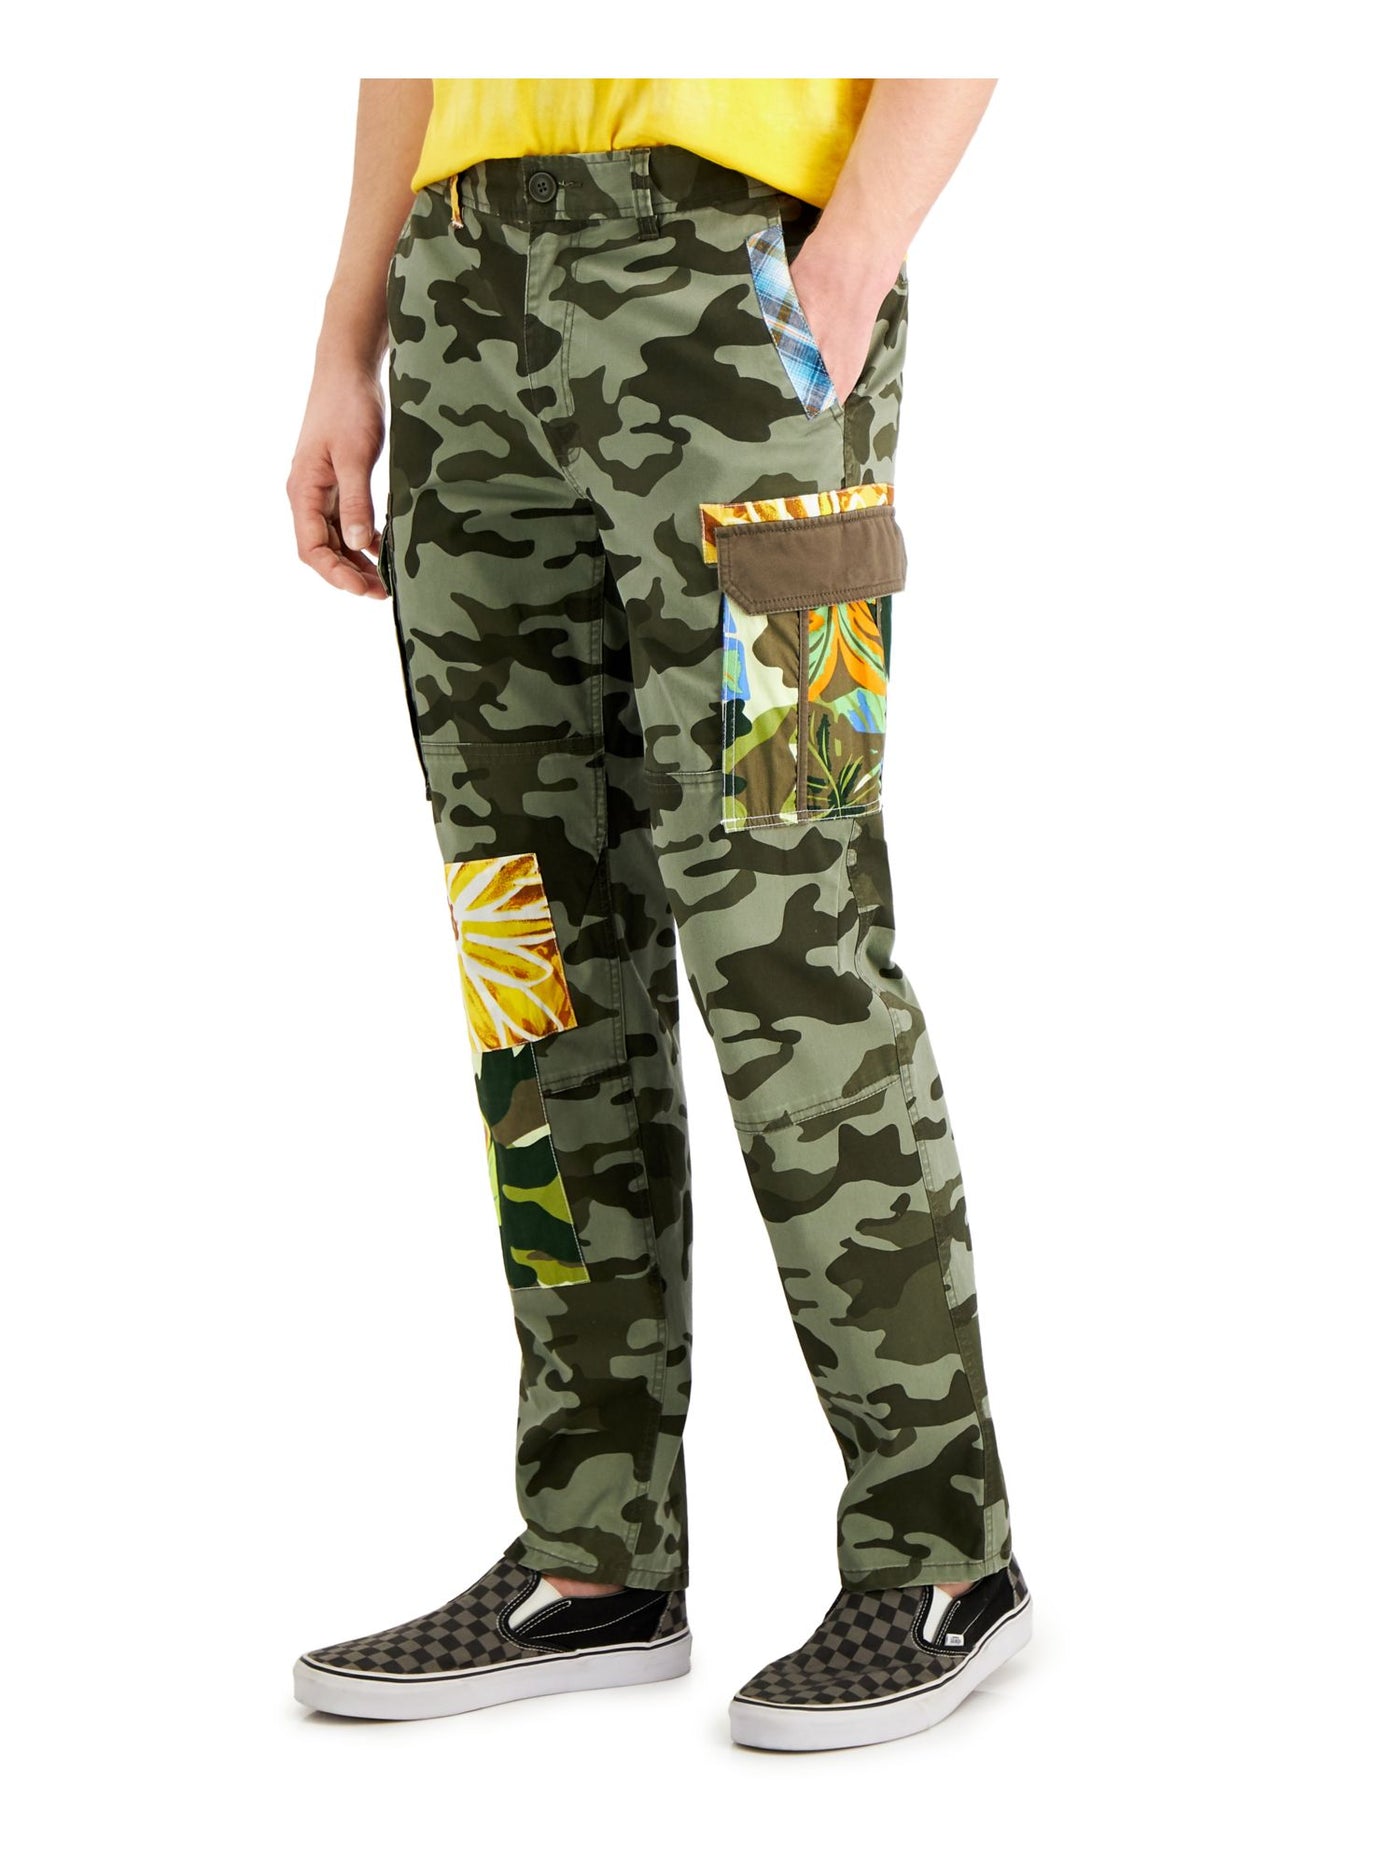 SUN STONE Mens Severin Green Camouflage Relaxed Fit Cargo Pants 30 Waist